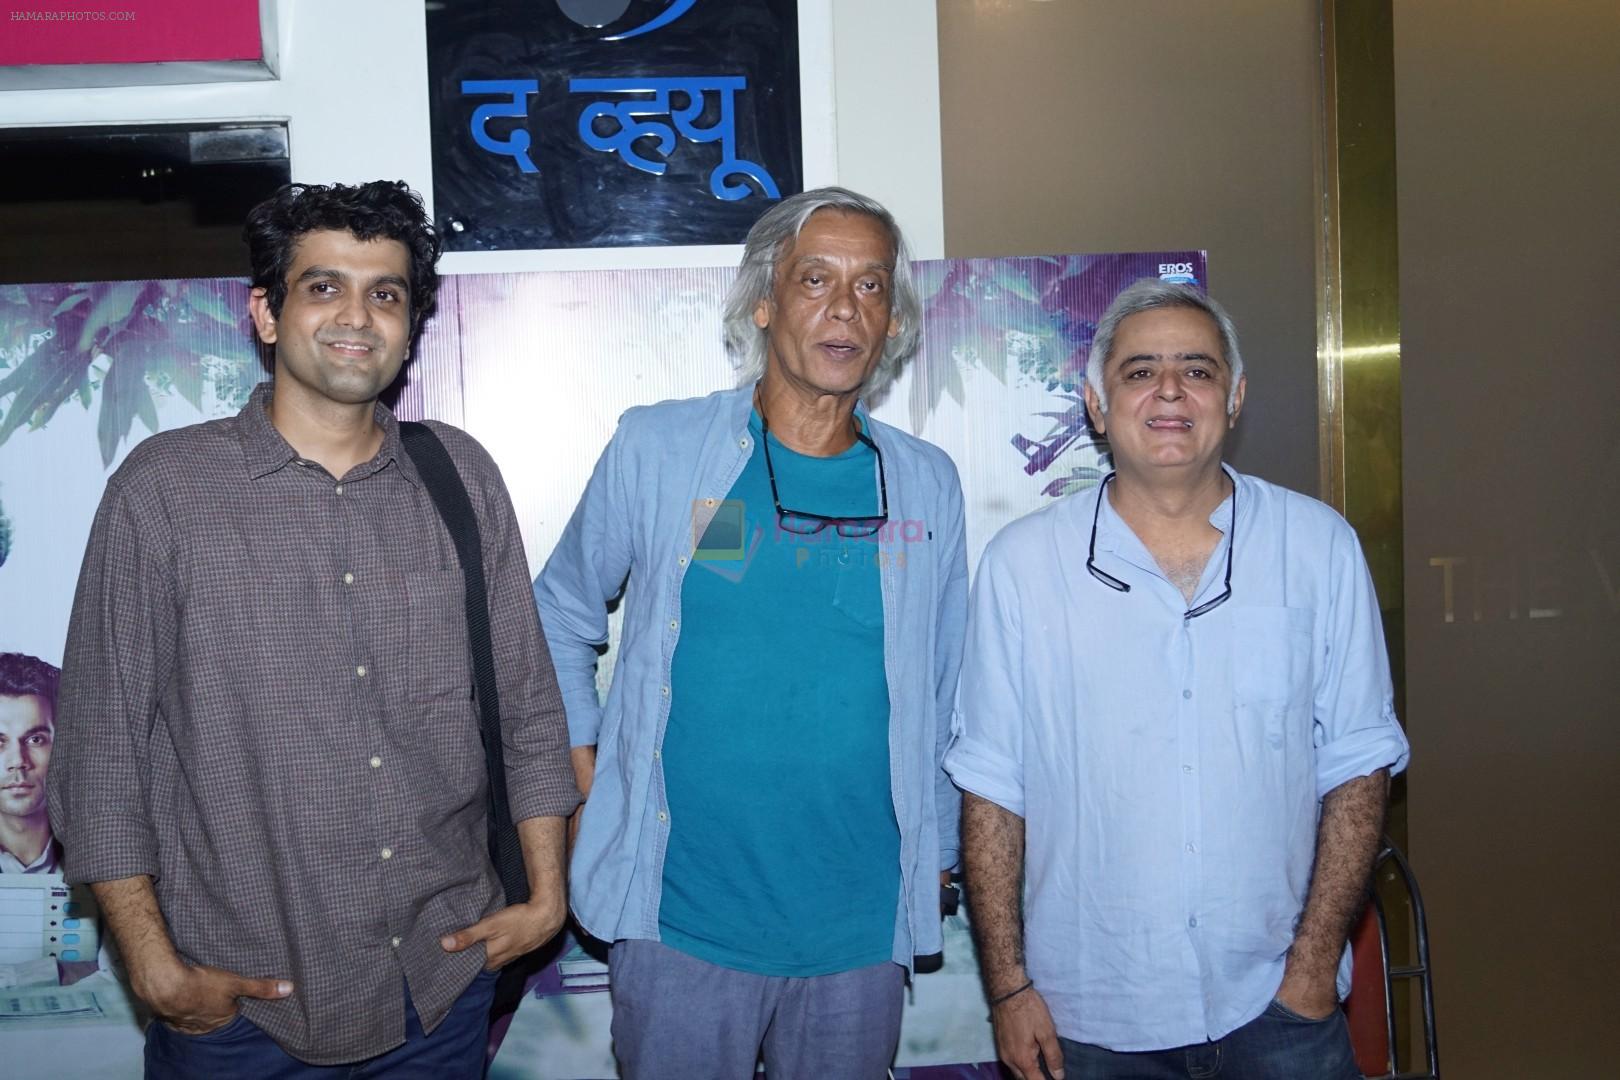 Hansal Mehta, Sudhir Mishra at the Special Screening Of Film Newton At The View on 21st Sept 2017